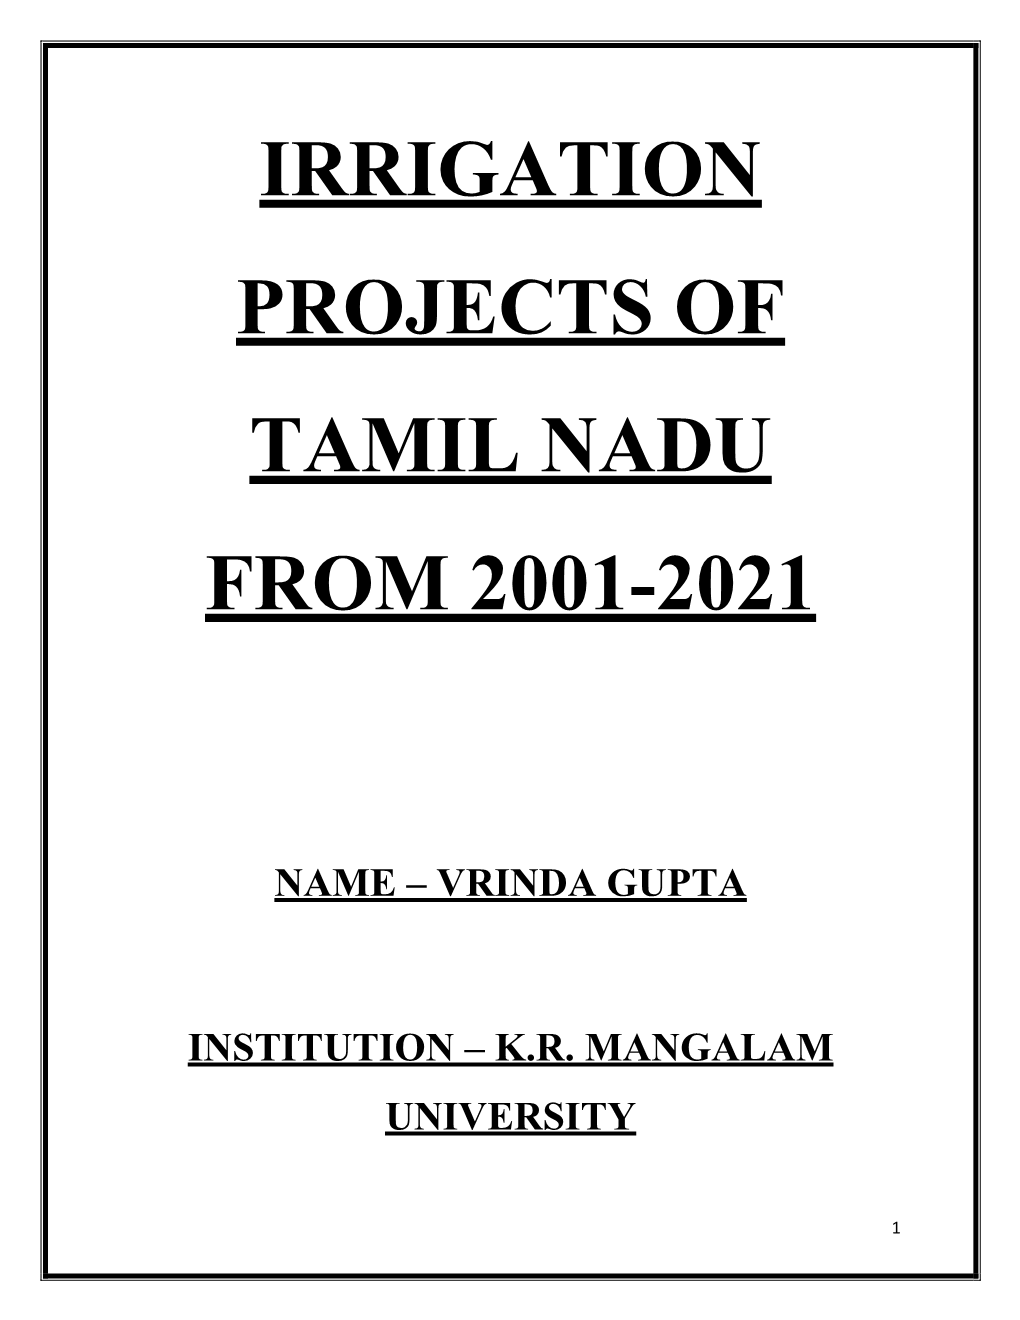 Irrigation Projects of Tamil Nadu from 2001-2021